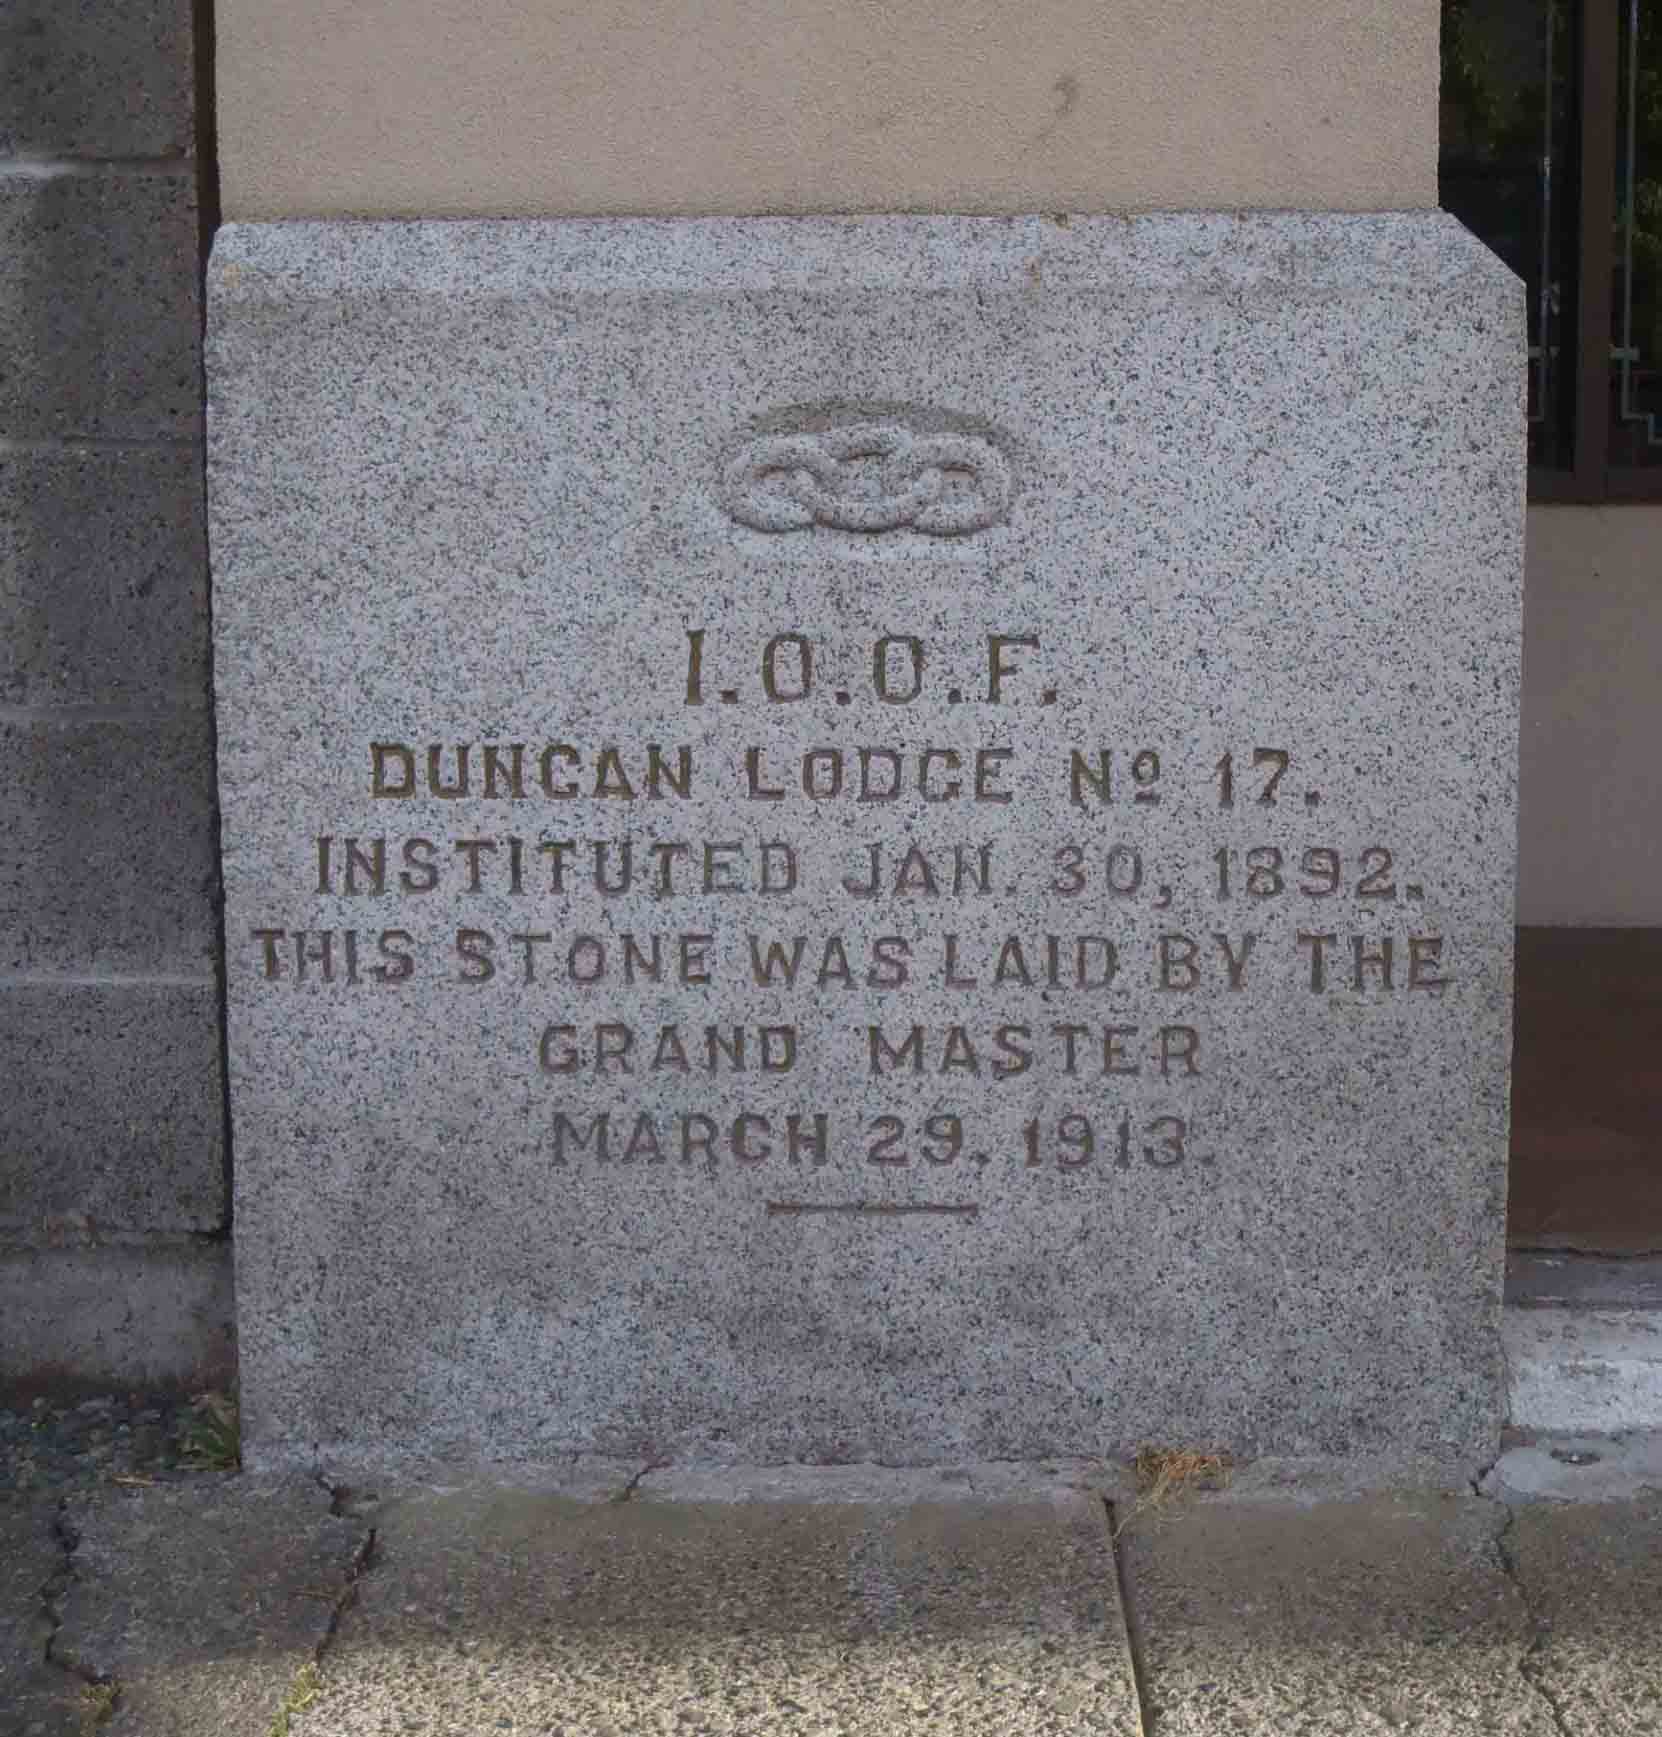 The I.O.O.F. cornerstone, placed on 29 March 1913, is still visible at the Station Street entrance of the Whittome Building